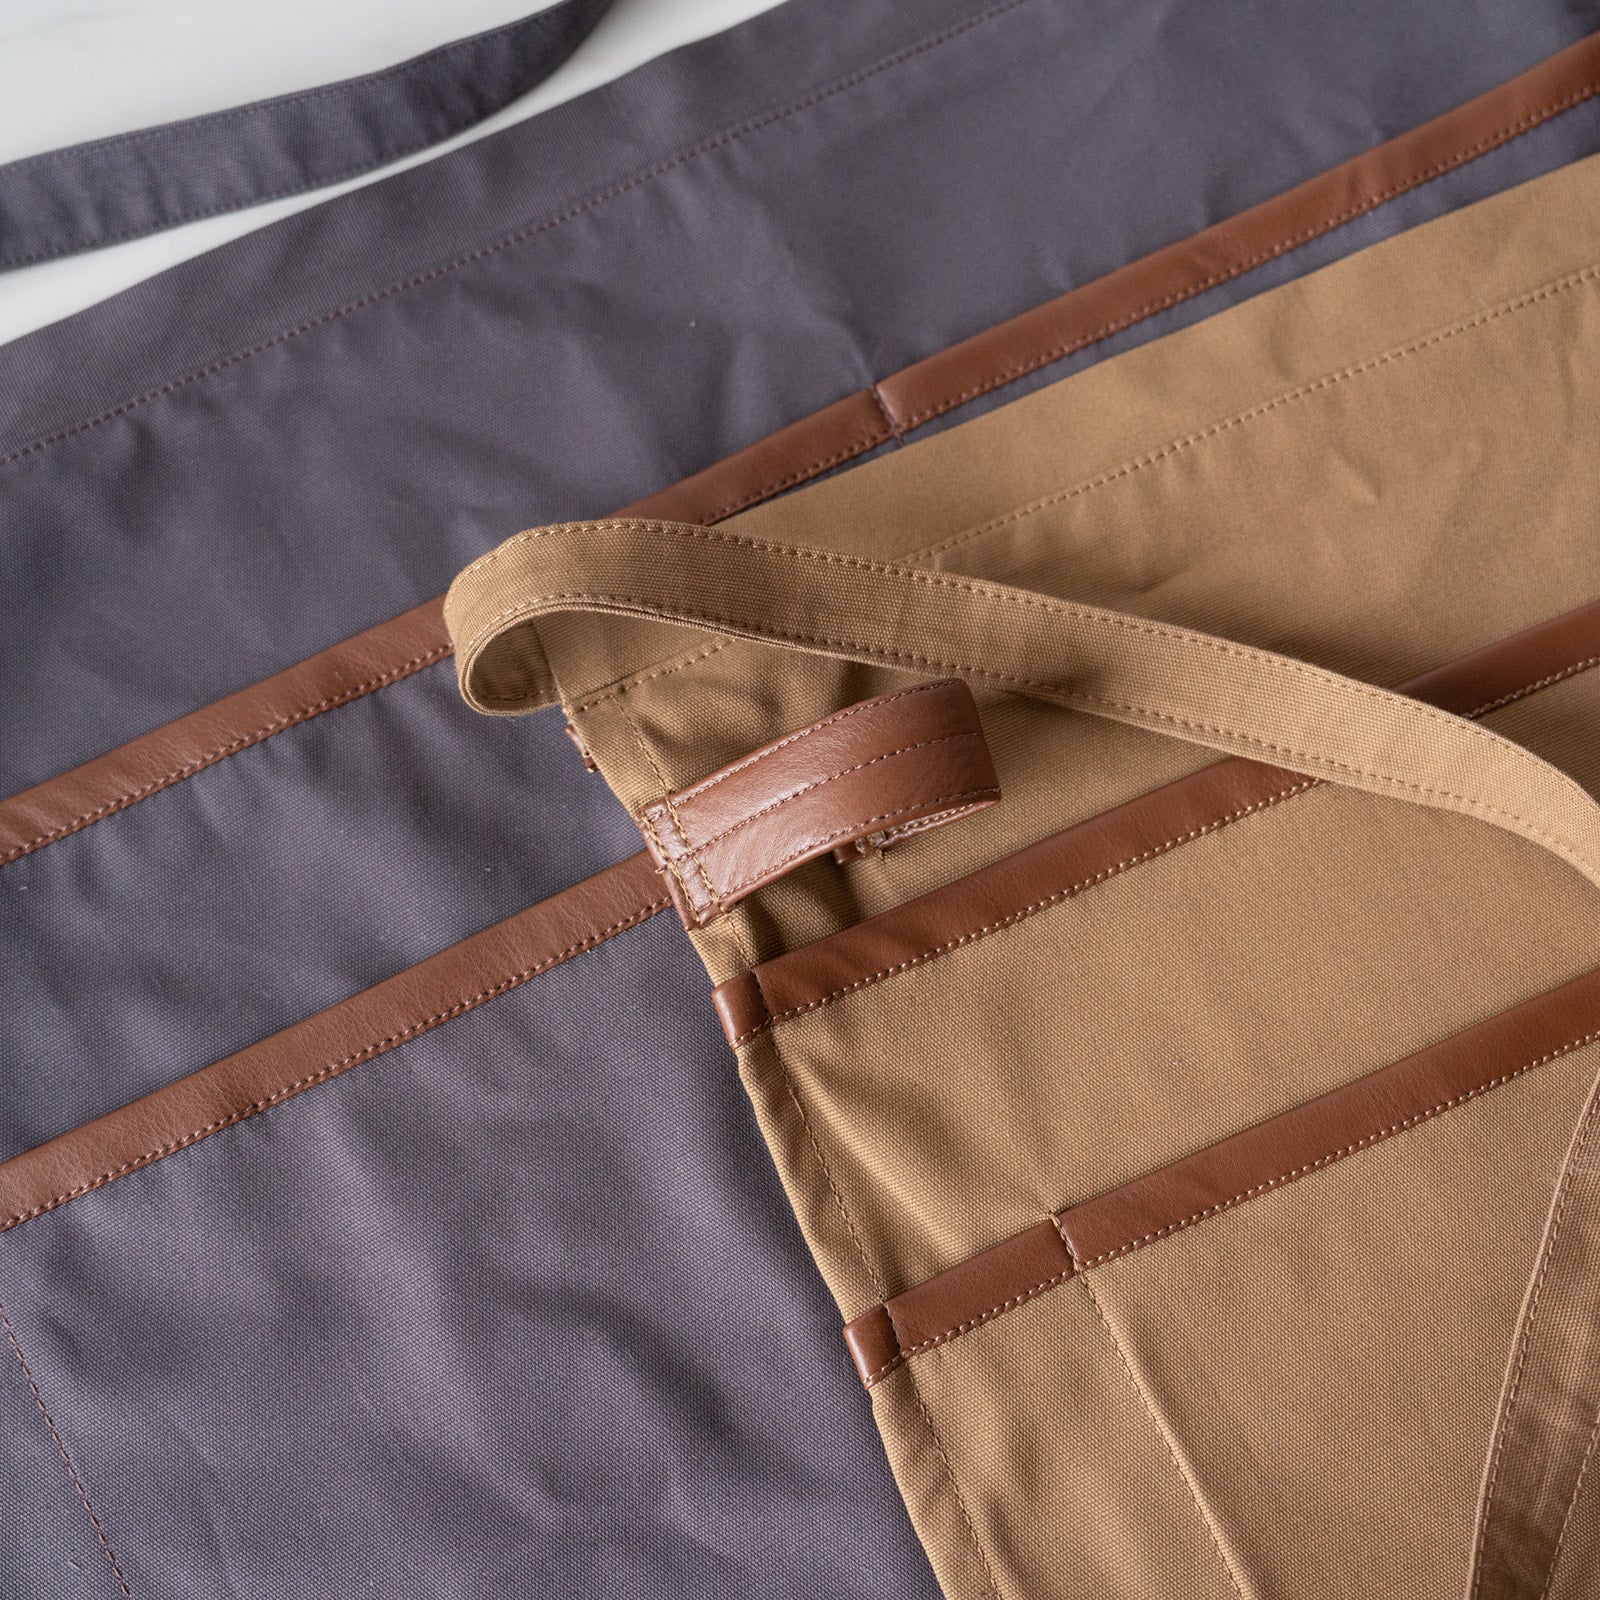 Utility aprons in grey and tan with vegan leather trim